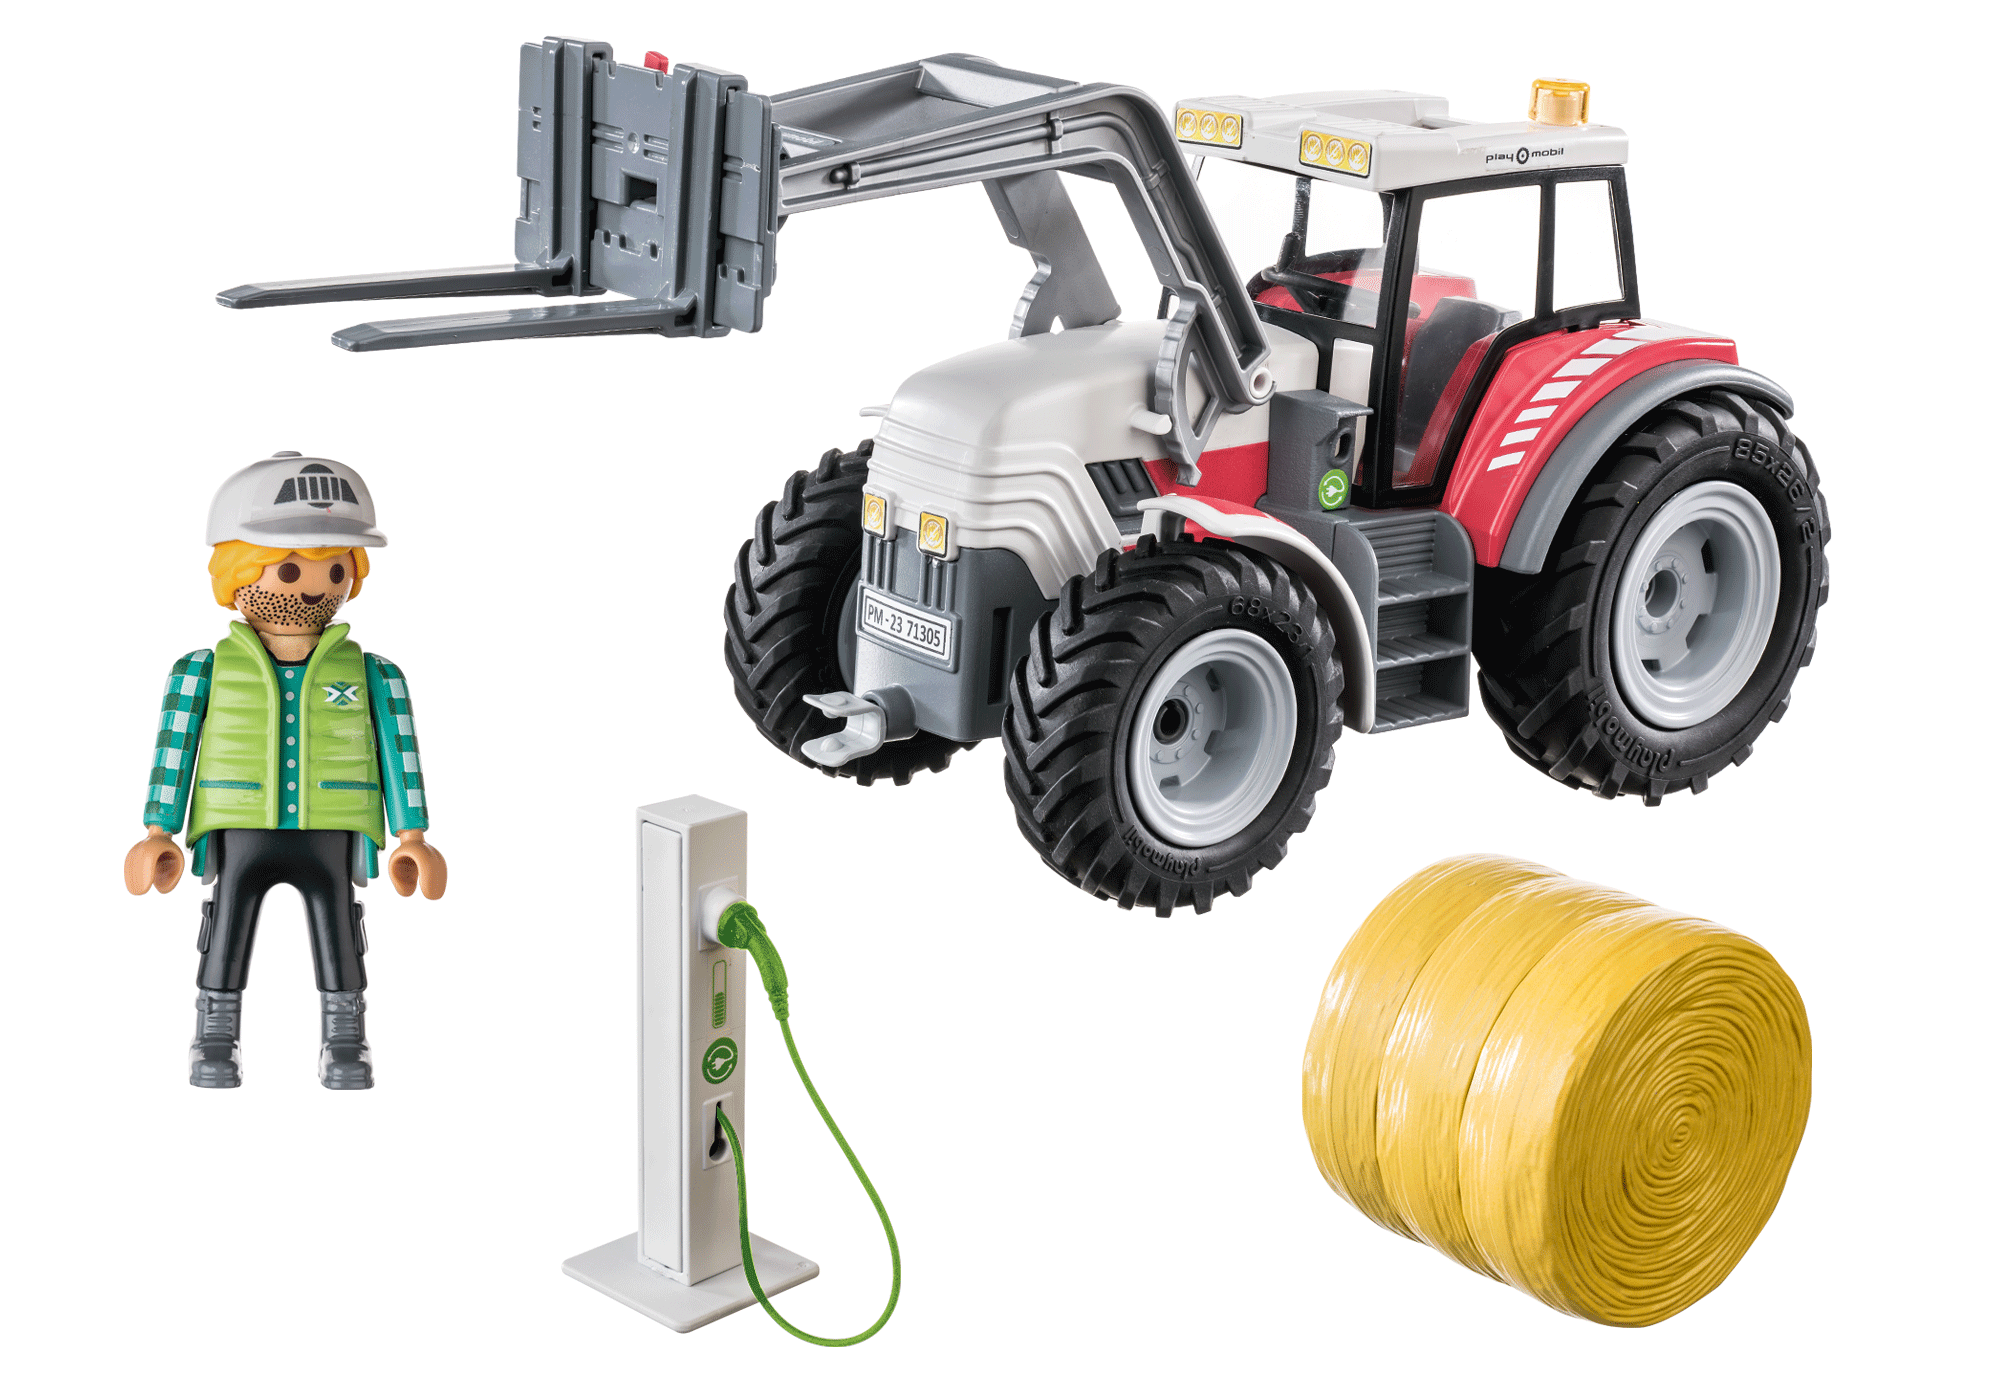 PLAYMOBIL COUNTRY - GRAND TRACTEUR ÉLECTRIQUE #71305 - PLAYMOBIL / Country